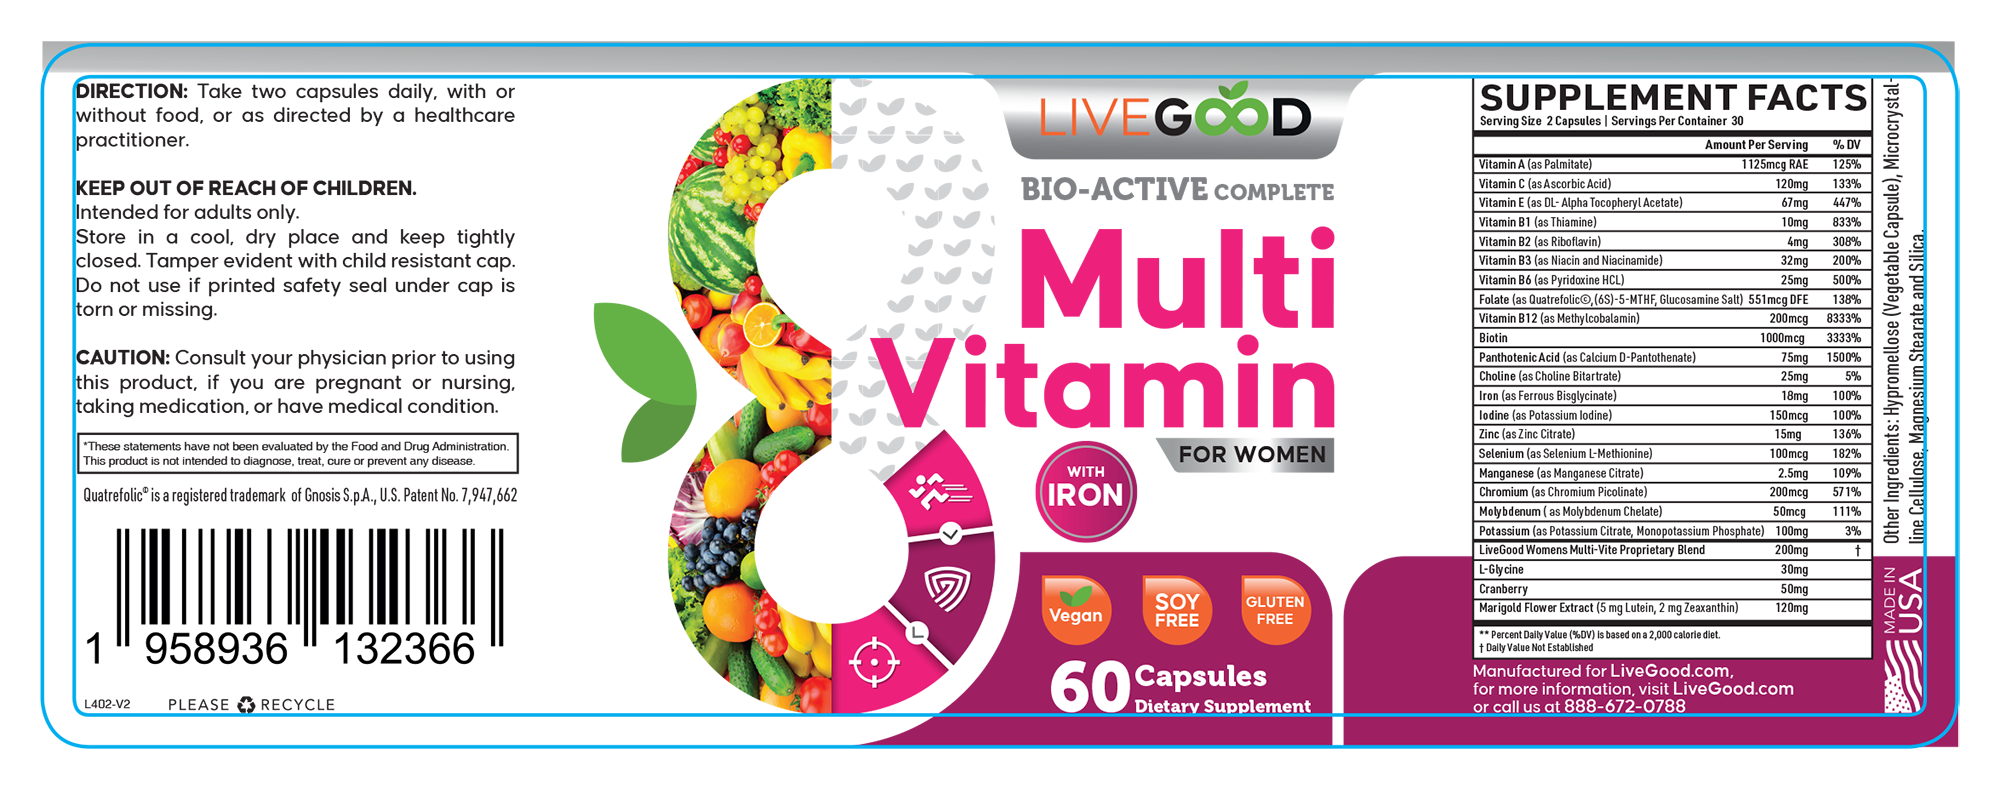 LiveGood BioActive Complete Multivitamin For Women with Iron